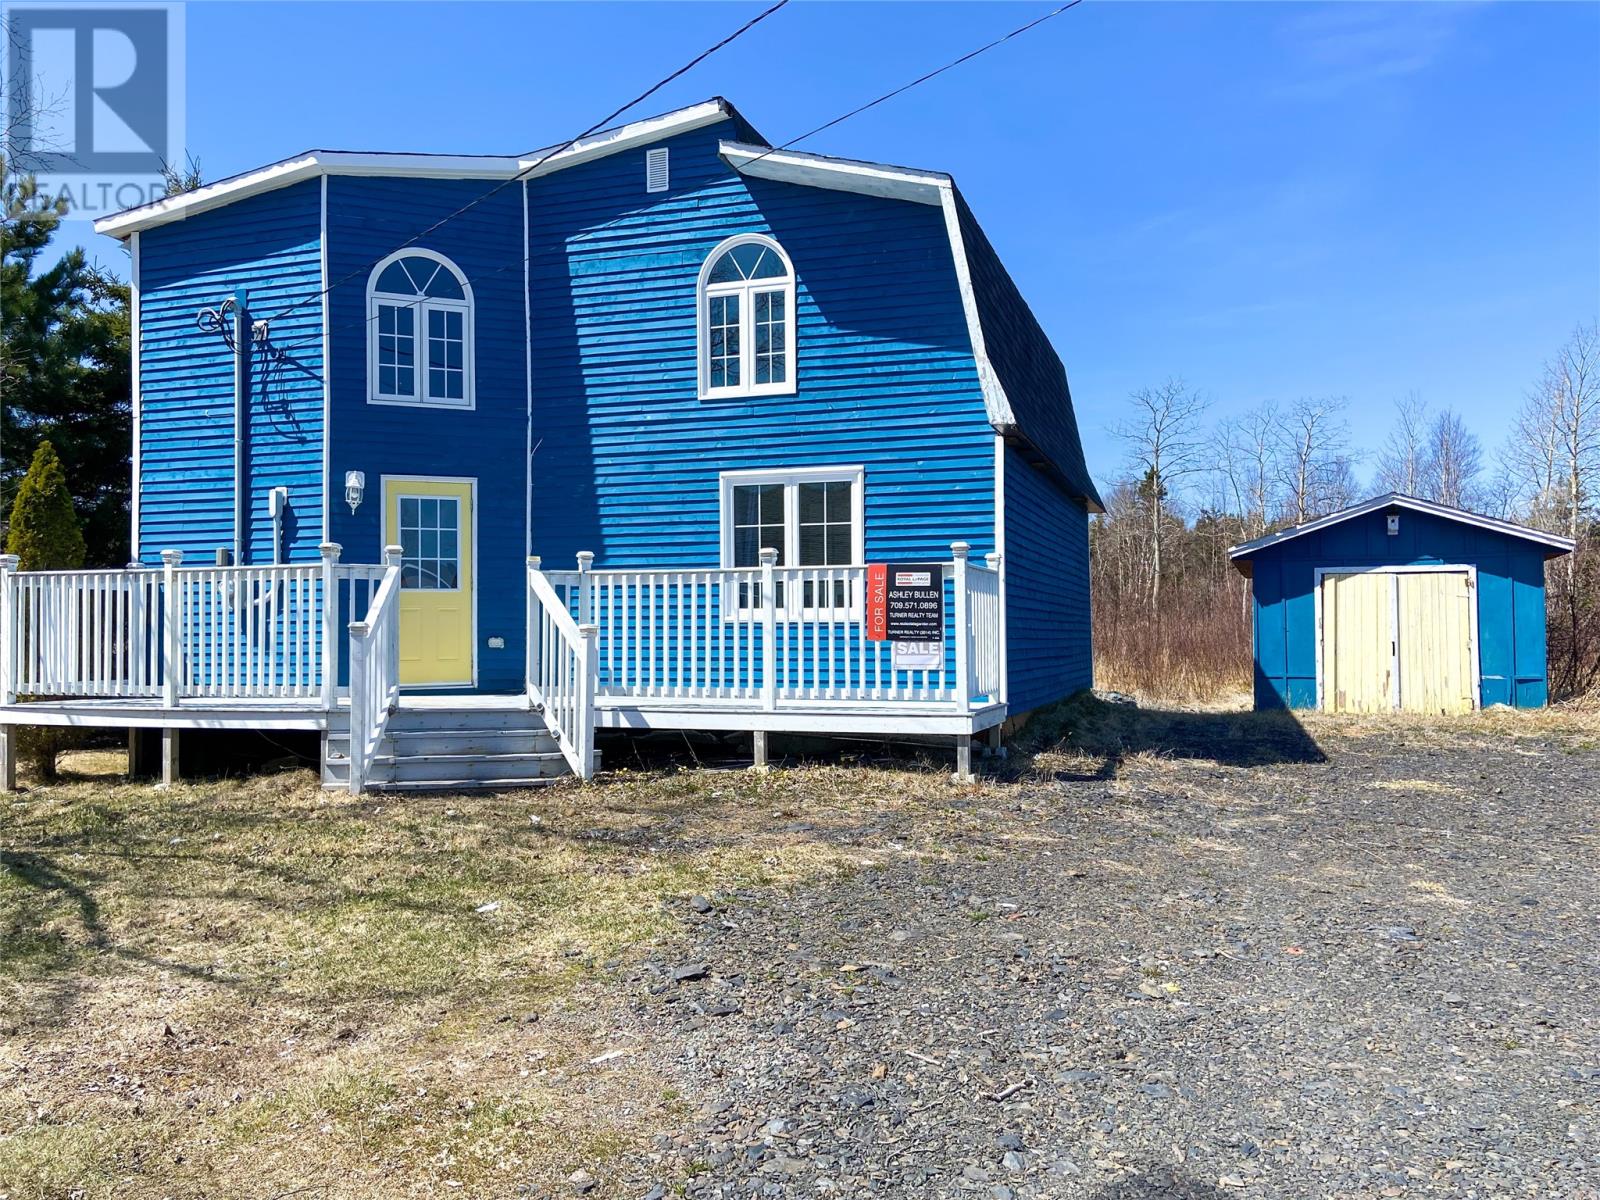 5 Allens Road located in Embree, Newfoundland and Labrador